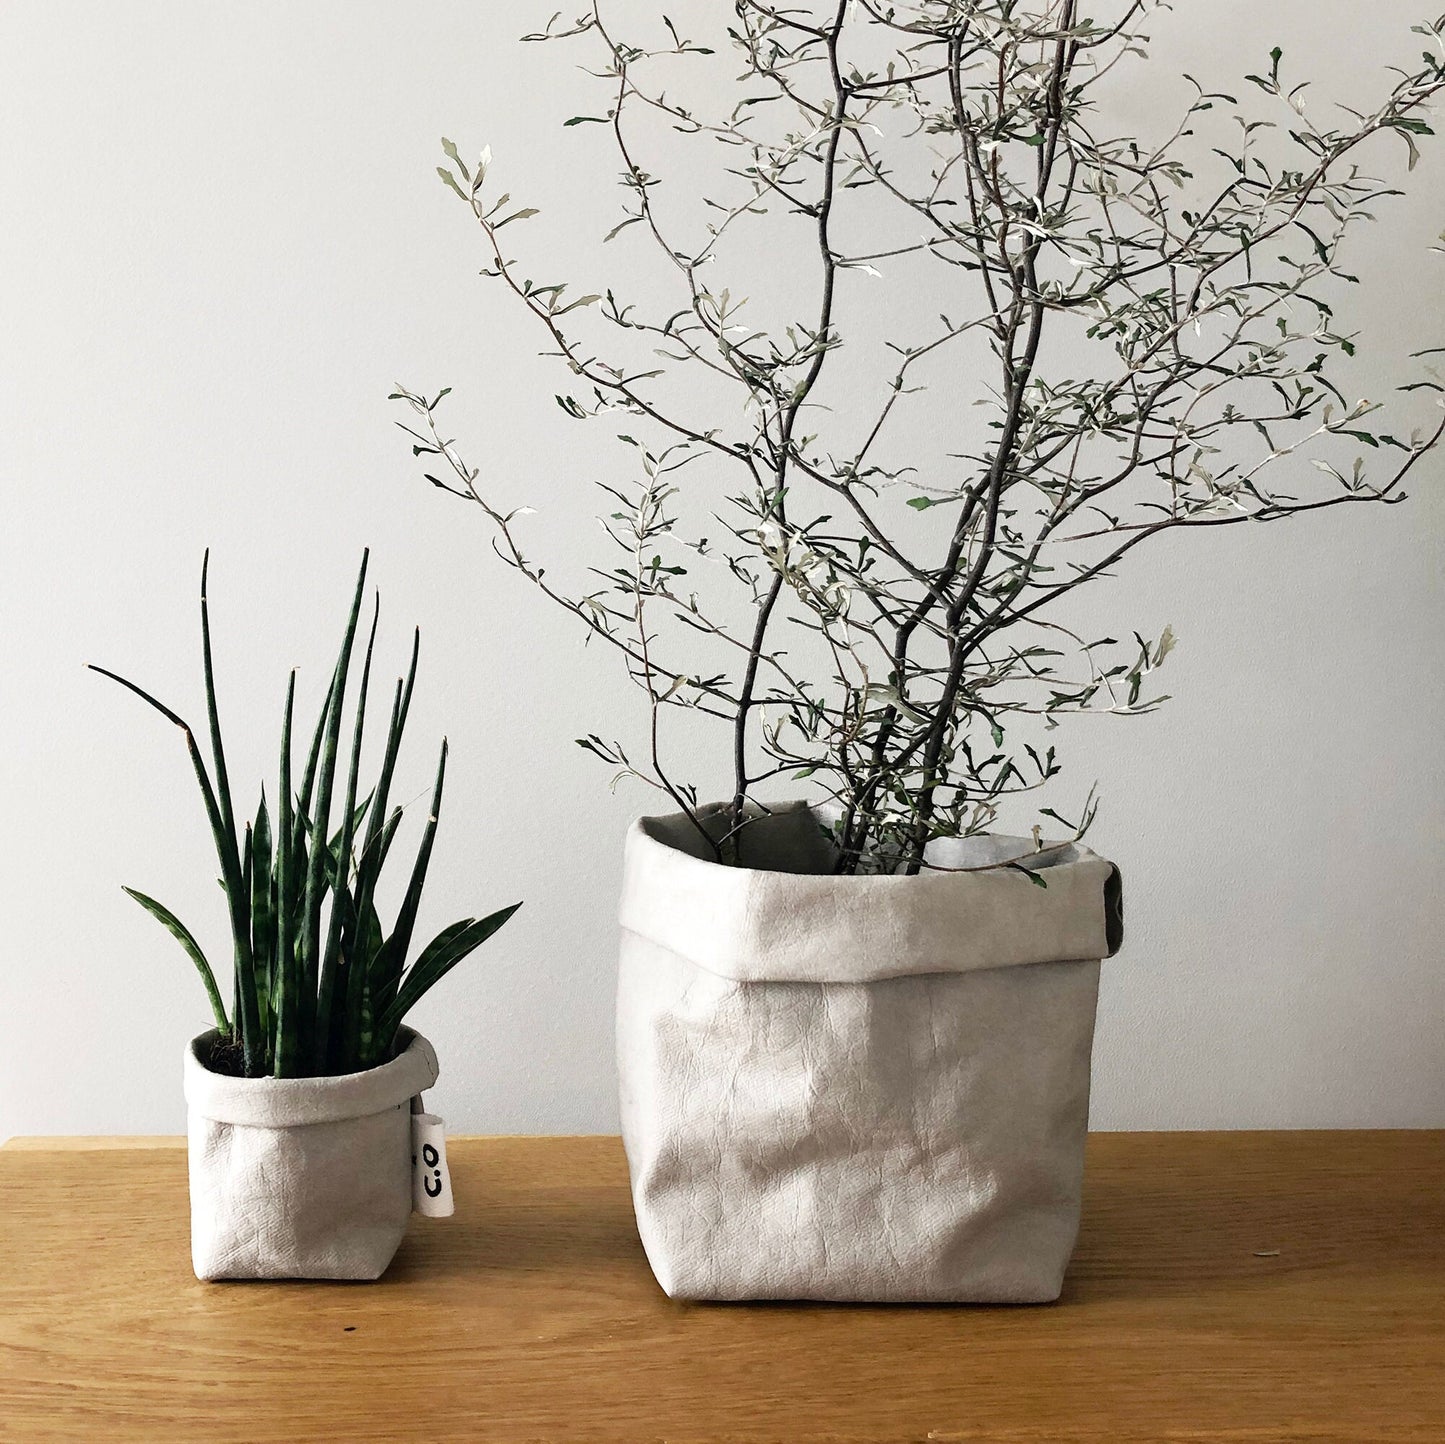 Washable paper bag for storage